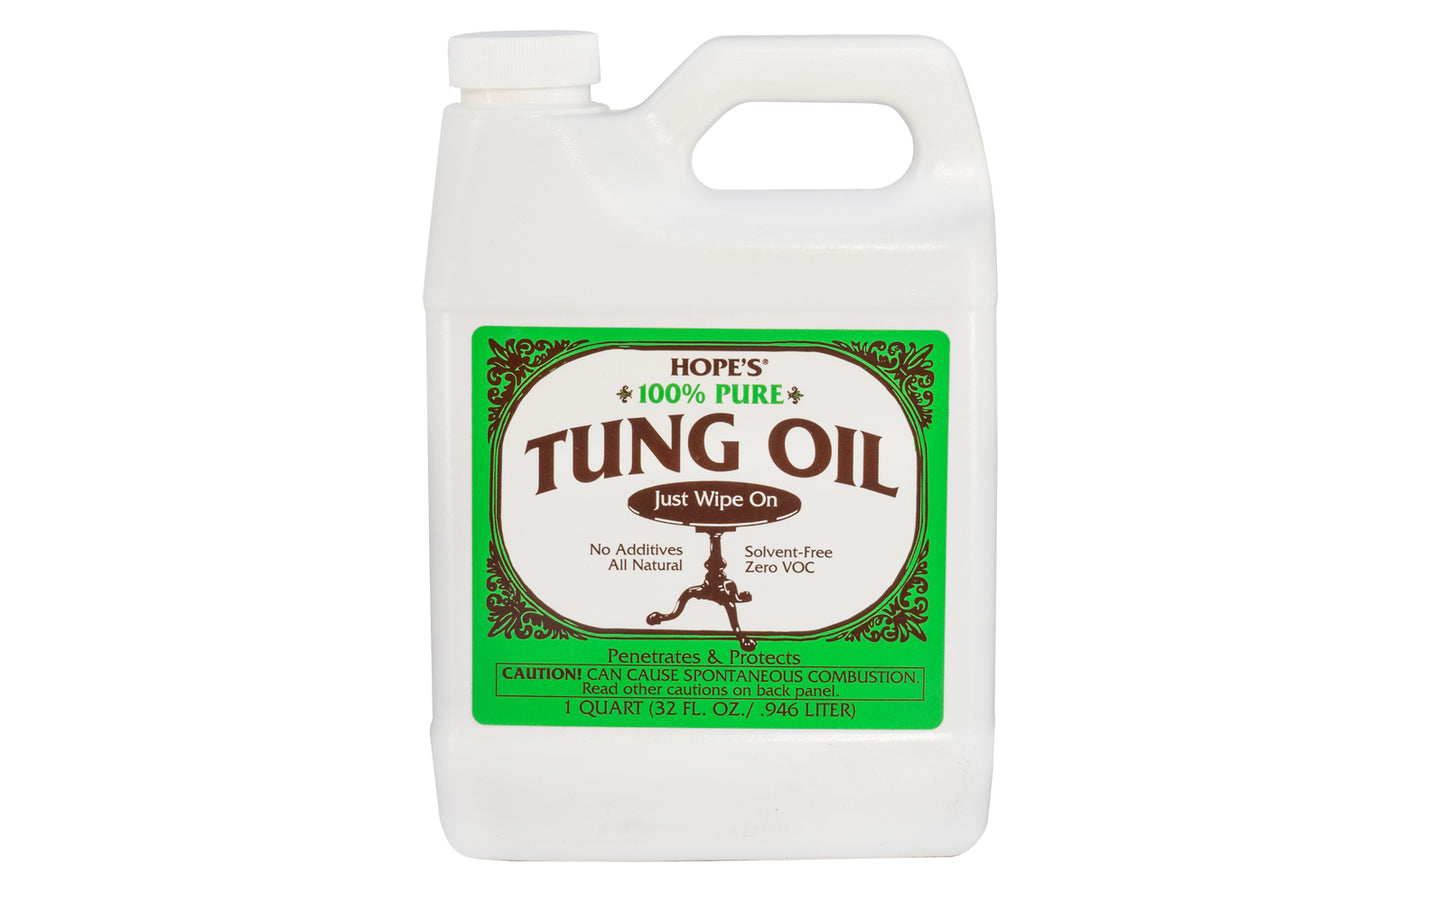 Hope's 100% Pure Tung Oil ~ 32 fl oz - 1 Quart - Zero VOC ~ Protects & beautifies all types of woods ~ No additives - All natural ~ Produces a classic 'hand rubbed' finish on fine wood surfaces